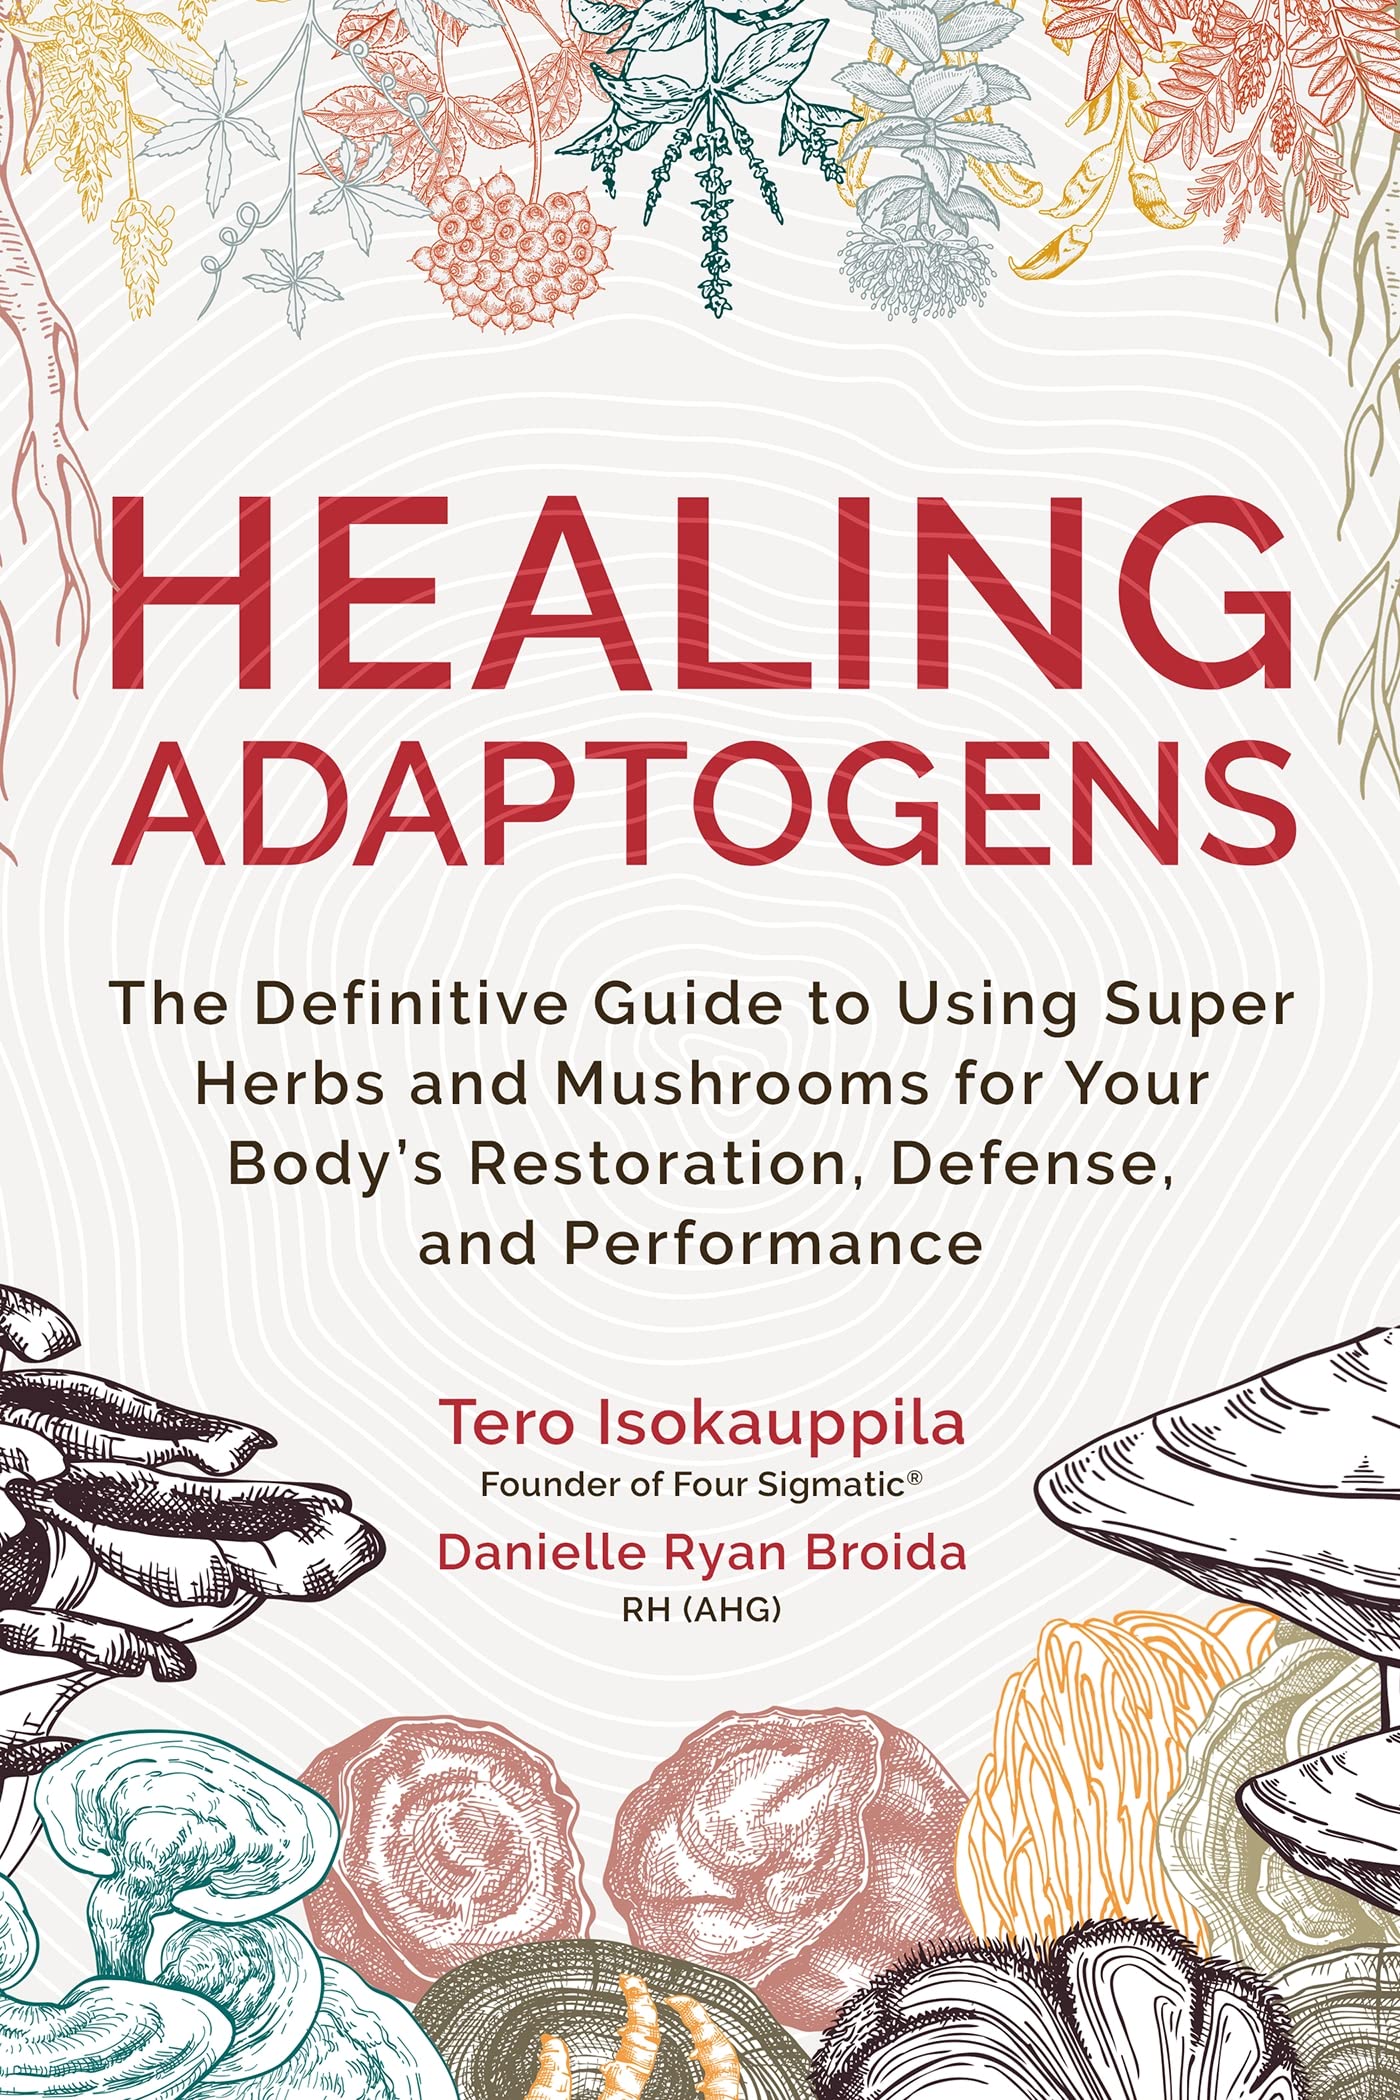 Healing Adaptogens: The Definitive Guide to Using Super Herbs and Mushrooms for Your Body s Restoration, Defense, and Performance  by Tero Isokauppila 